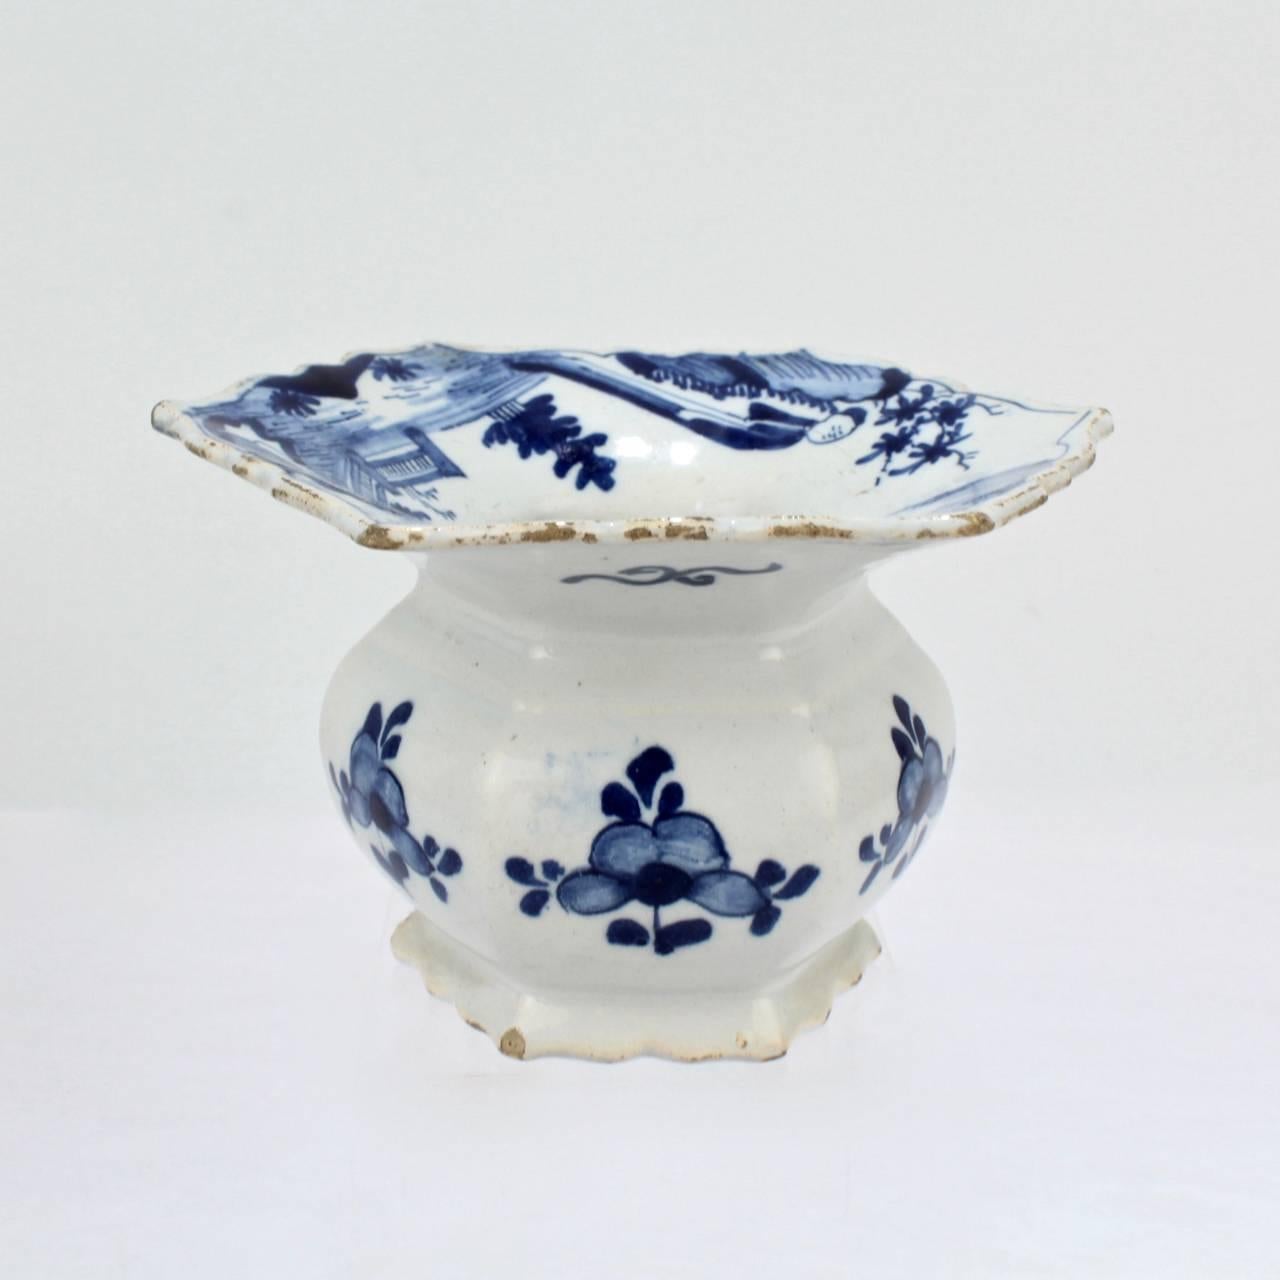 18th Century and Earlier Rare Antique 18th Century Dutch Delft Pottery Spittoon with Chinese Figures